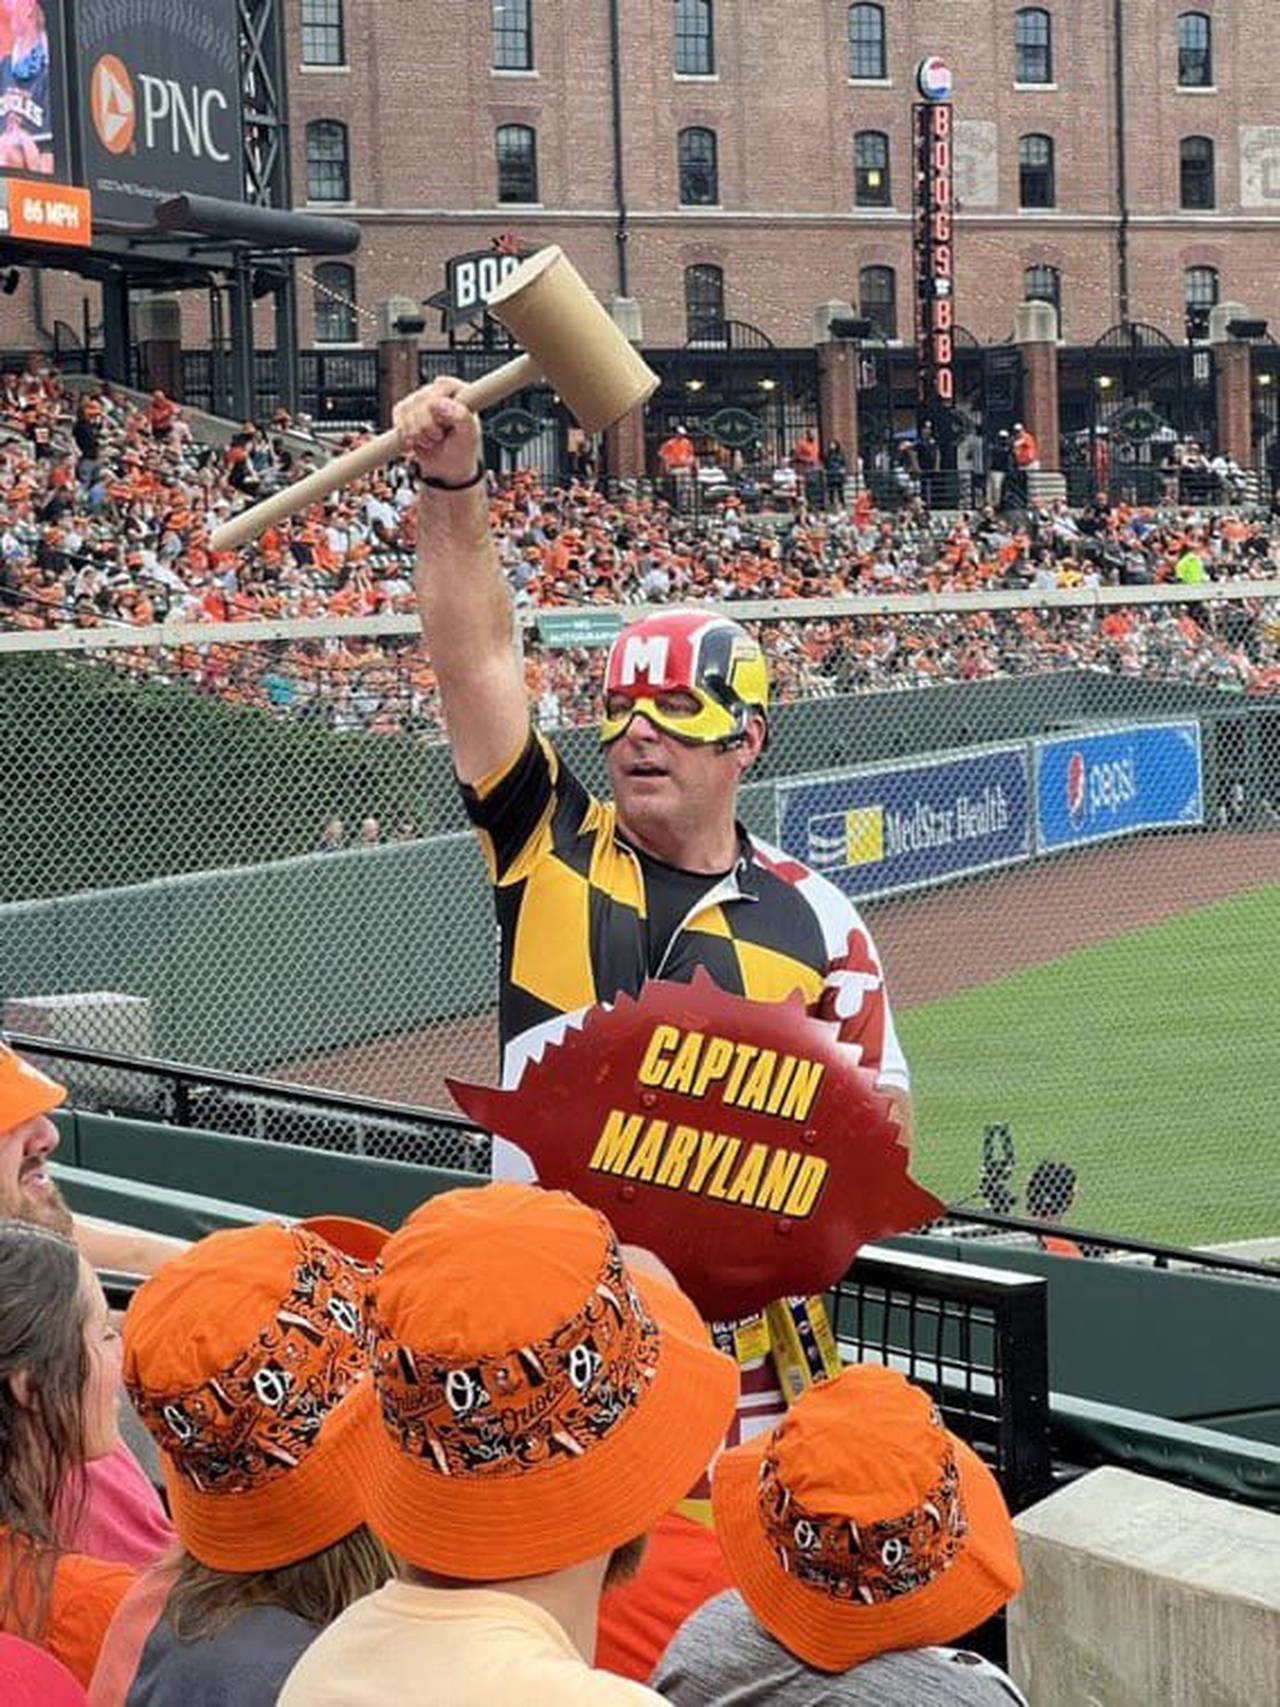 Captain Maryland hyping up the crowd at Camden Yards during an Orioles game.